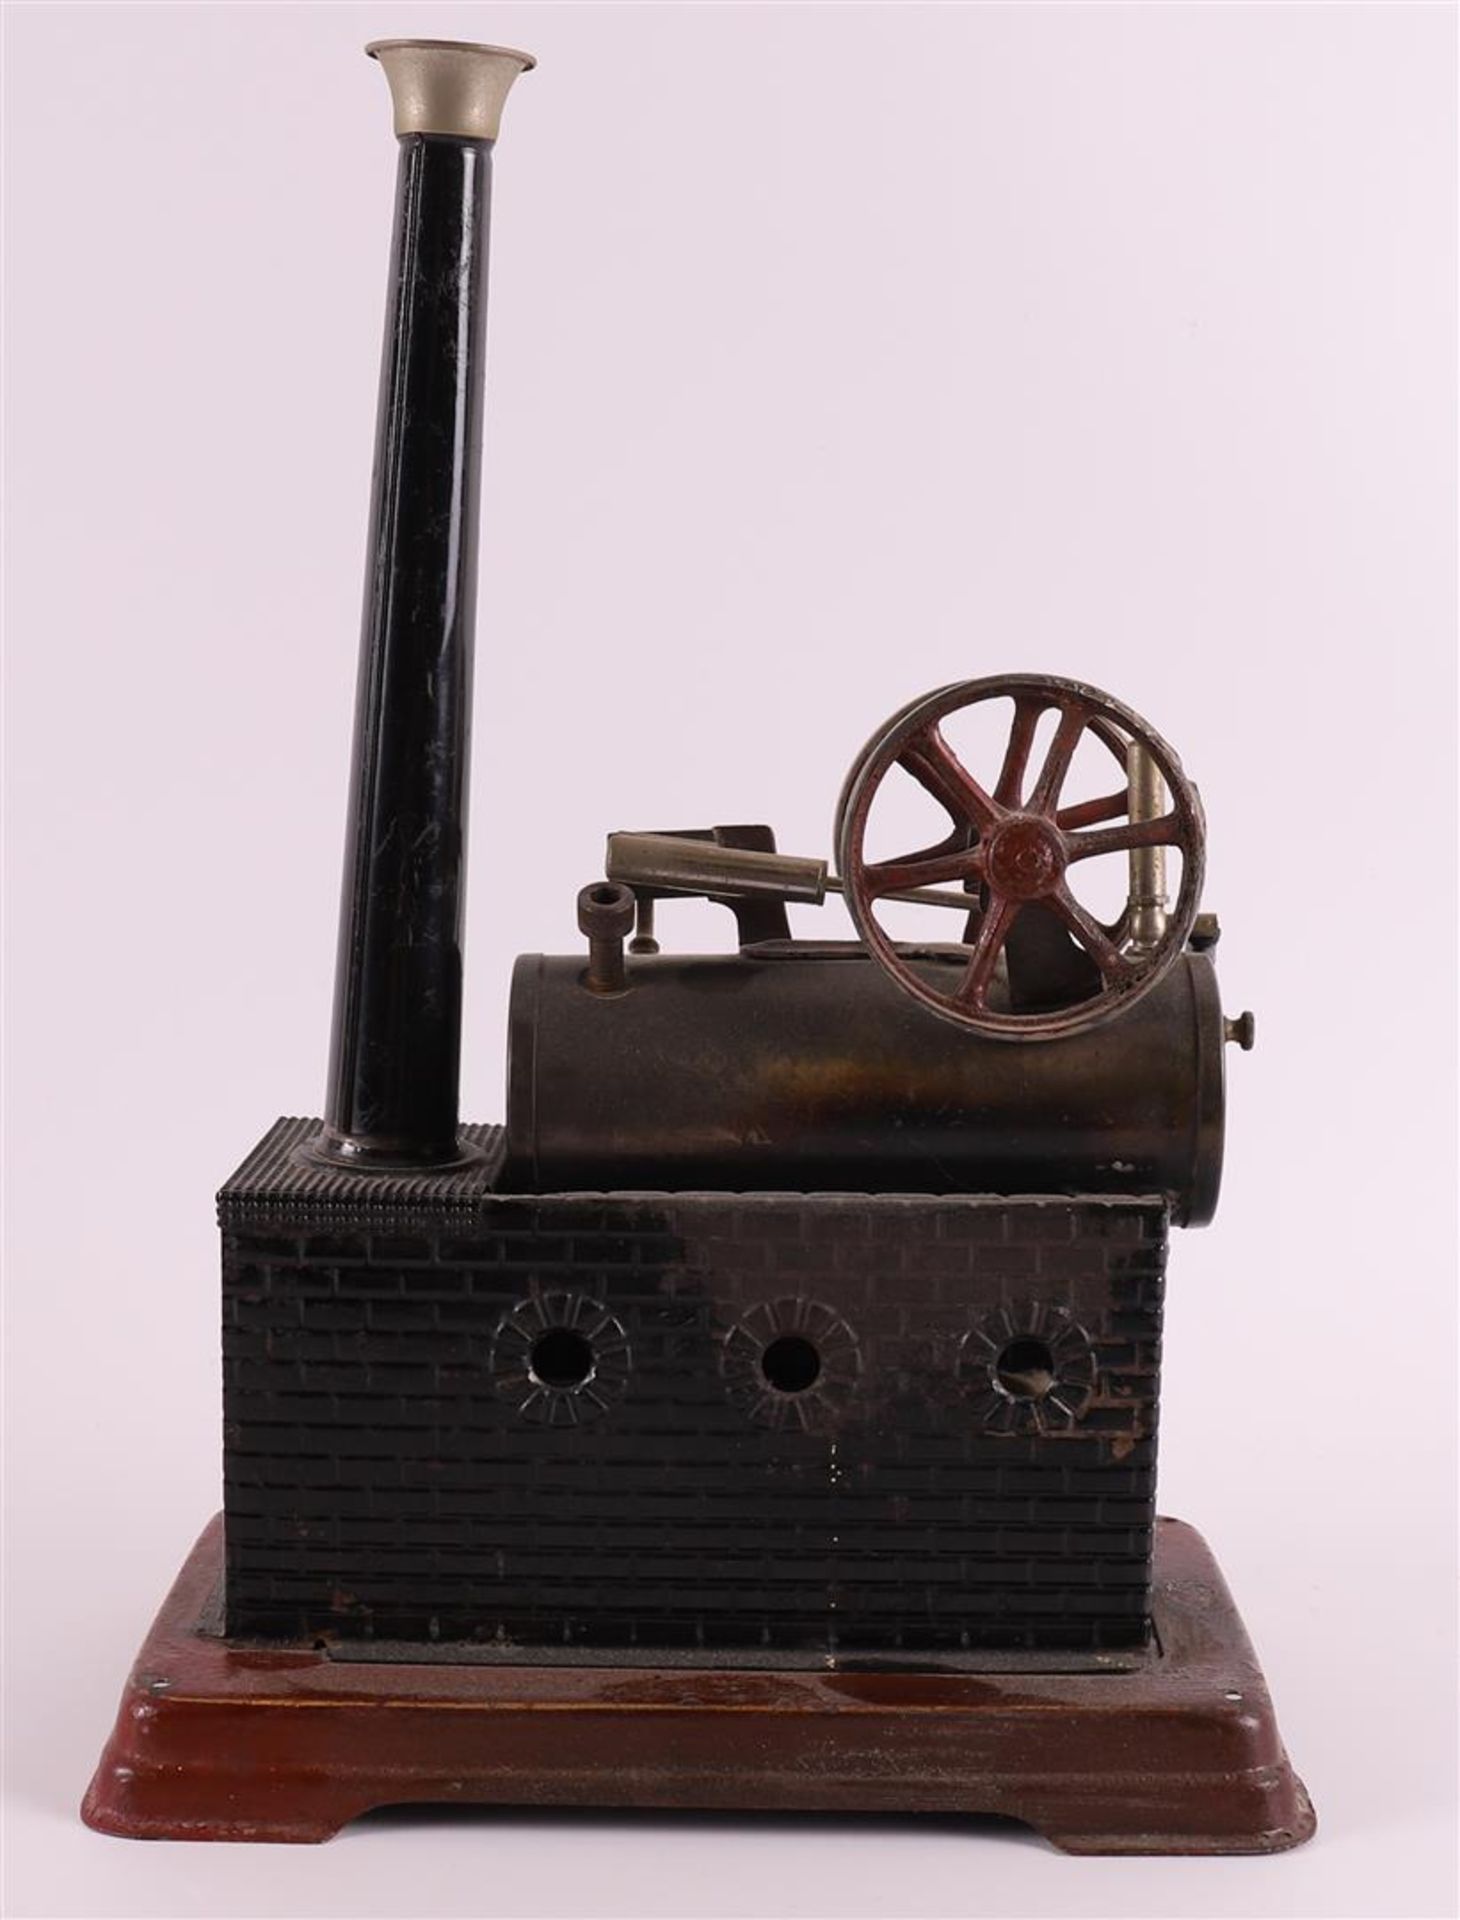 A tin steam engine, 1st half of the 20th century, h 29 x l 20 x w 11.5 cm. . - Image 4 of 6